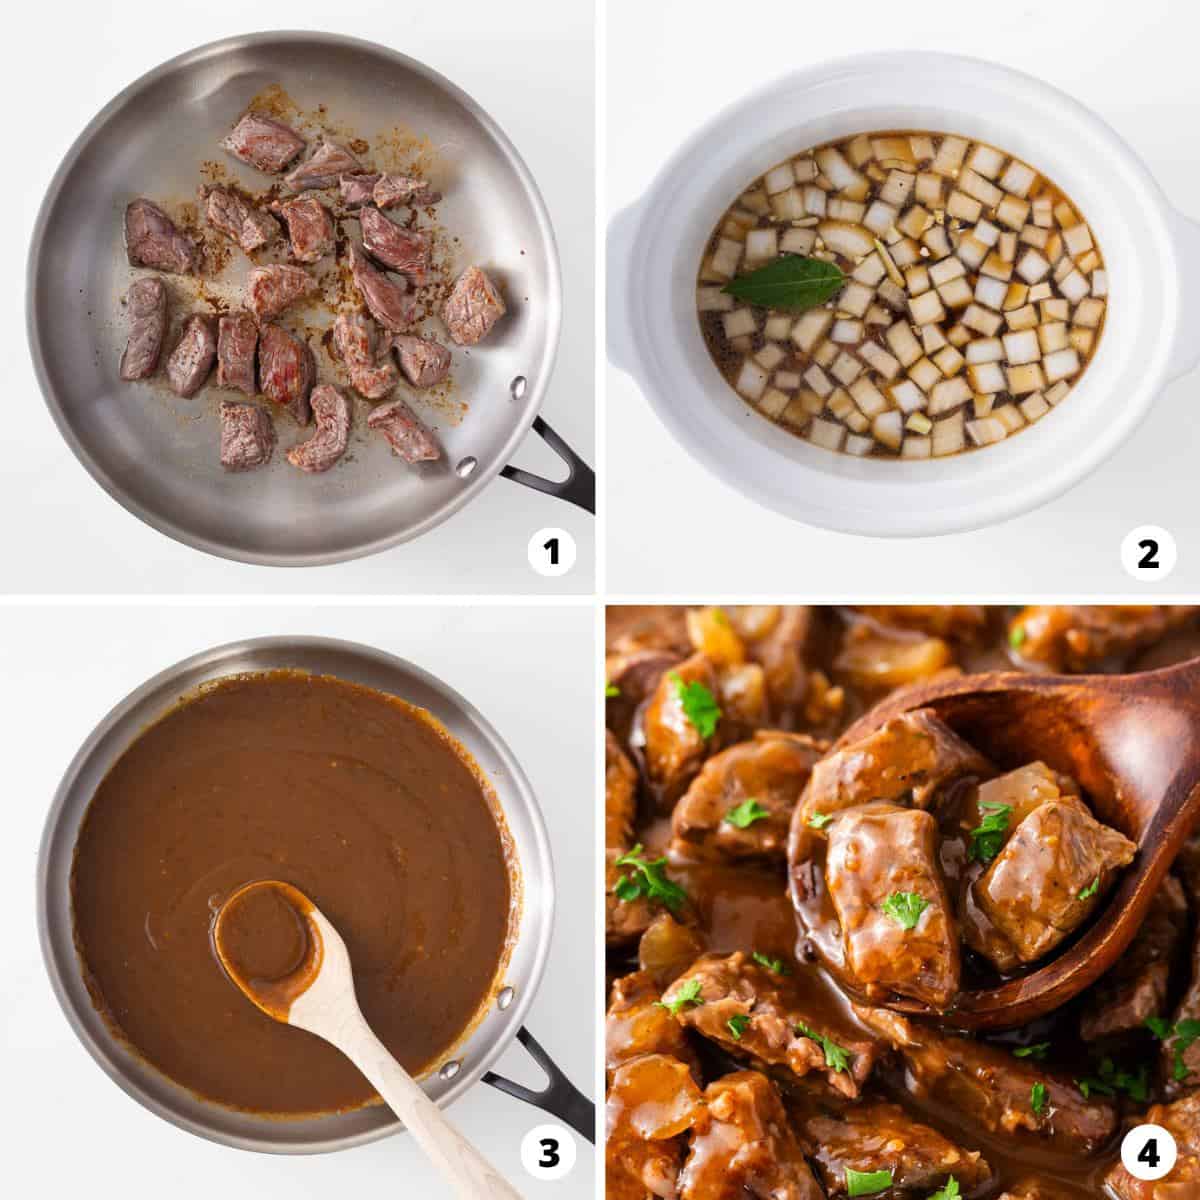 Showing how to make beef tips in a 4 step collage.